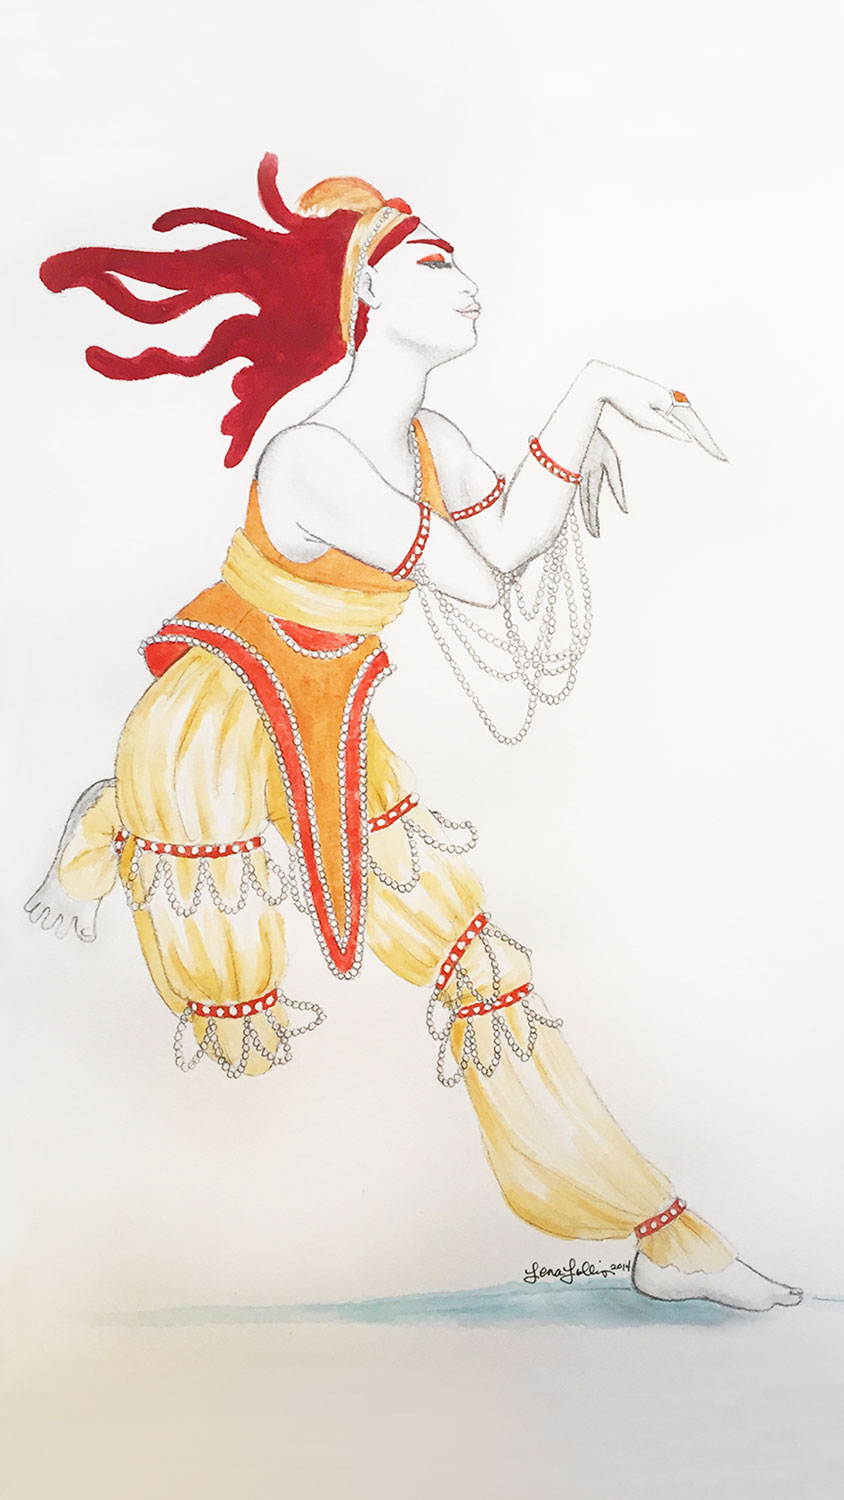 Dancer in the style of Lèon Bakst 